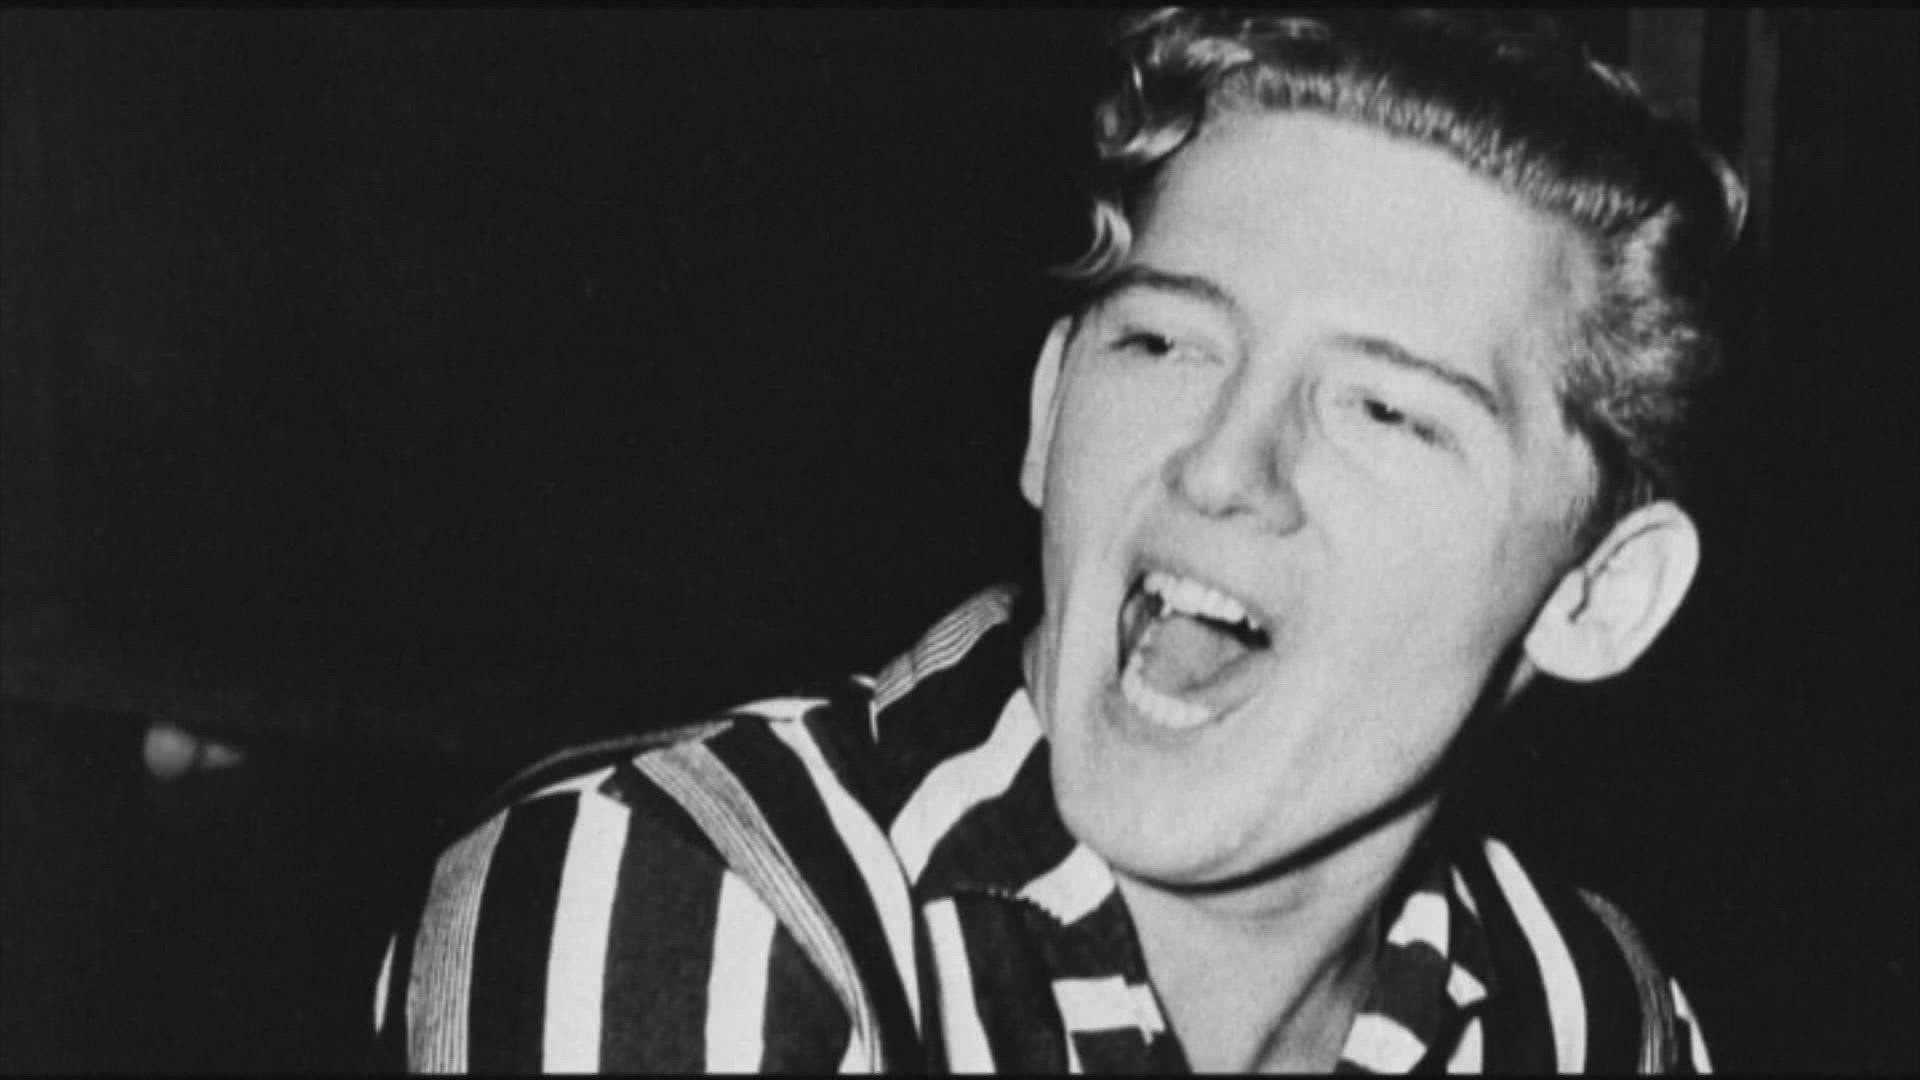 Of all the rock rebels to emerge in the 1950s, few captured the new genre's attraction and danger as unforgettably as Louisiana-born piano player Jerry Lee Lewis.